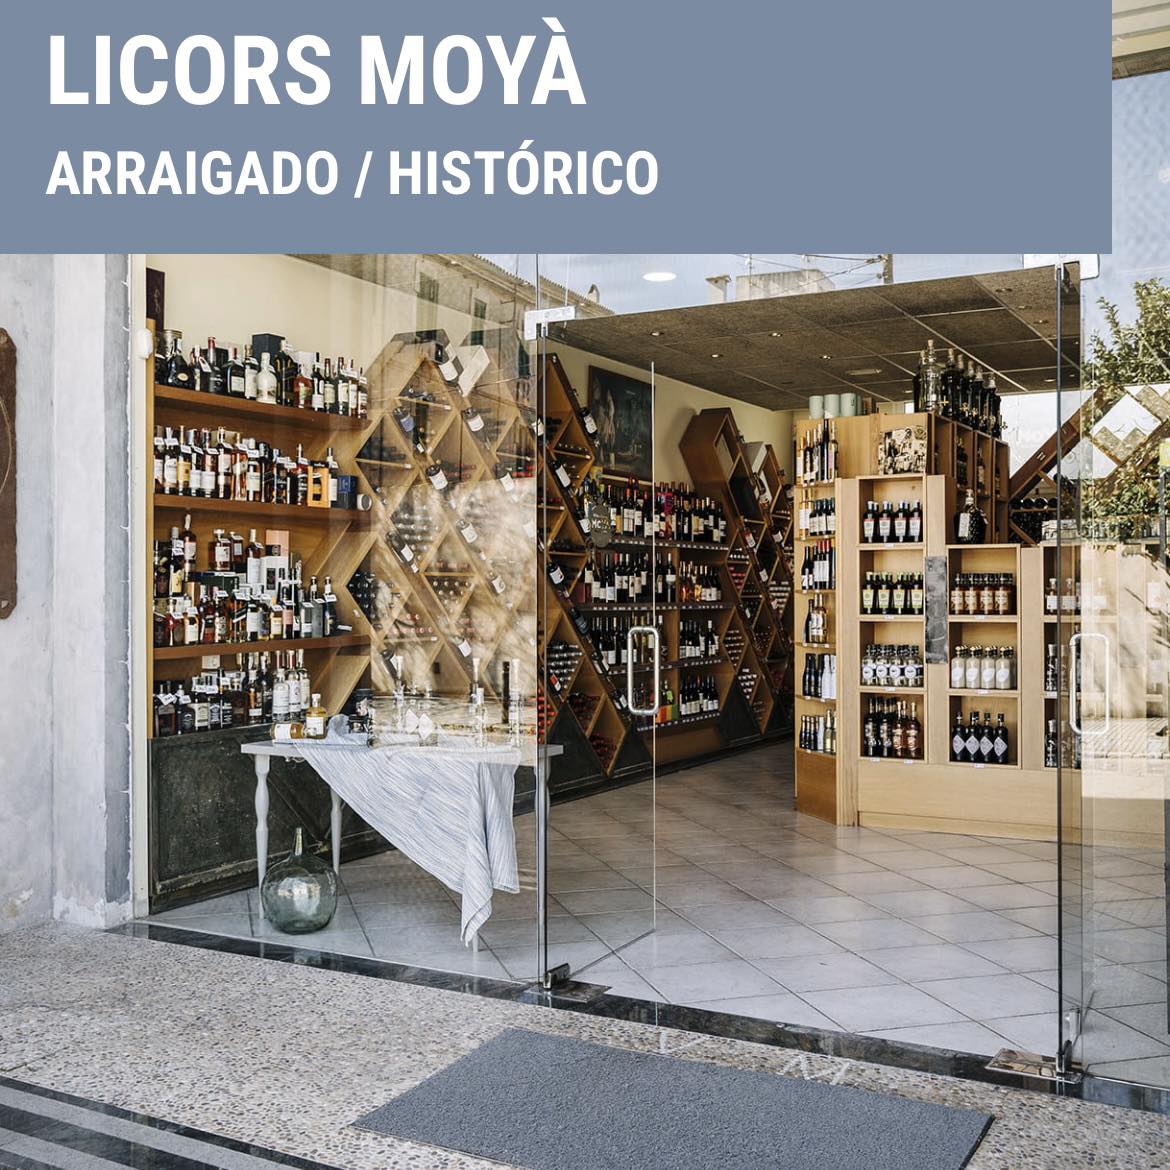 THE FIRST VEHICLE THAT ACQUIRED LIQUOR MOYÀ WAS JALISCO, A MOTOCARRO THAT COST 1500 PESETAS